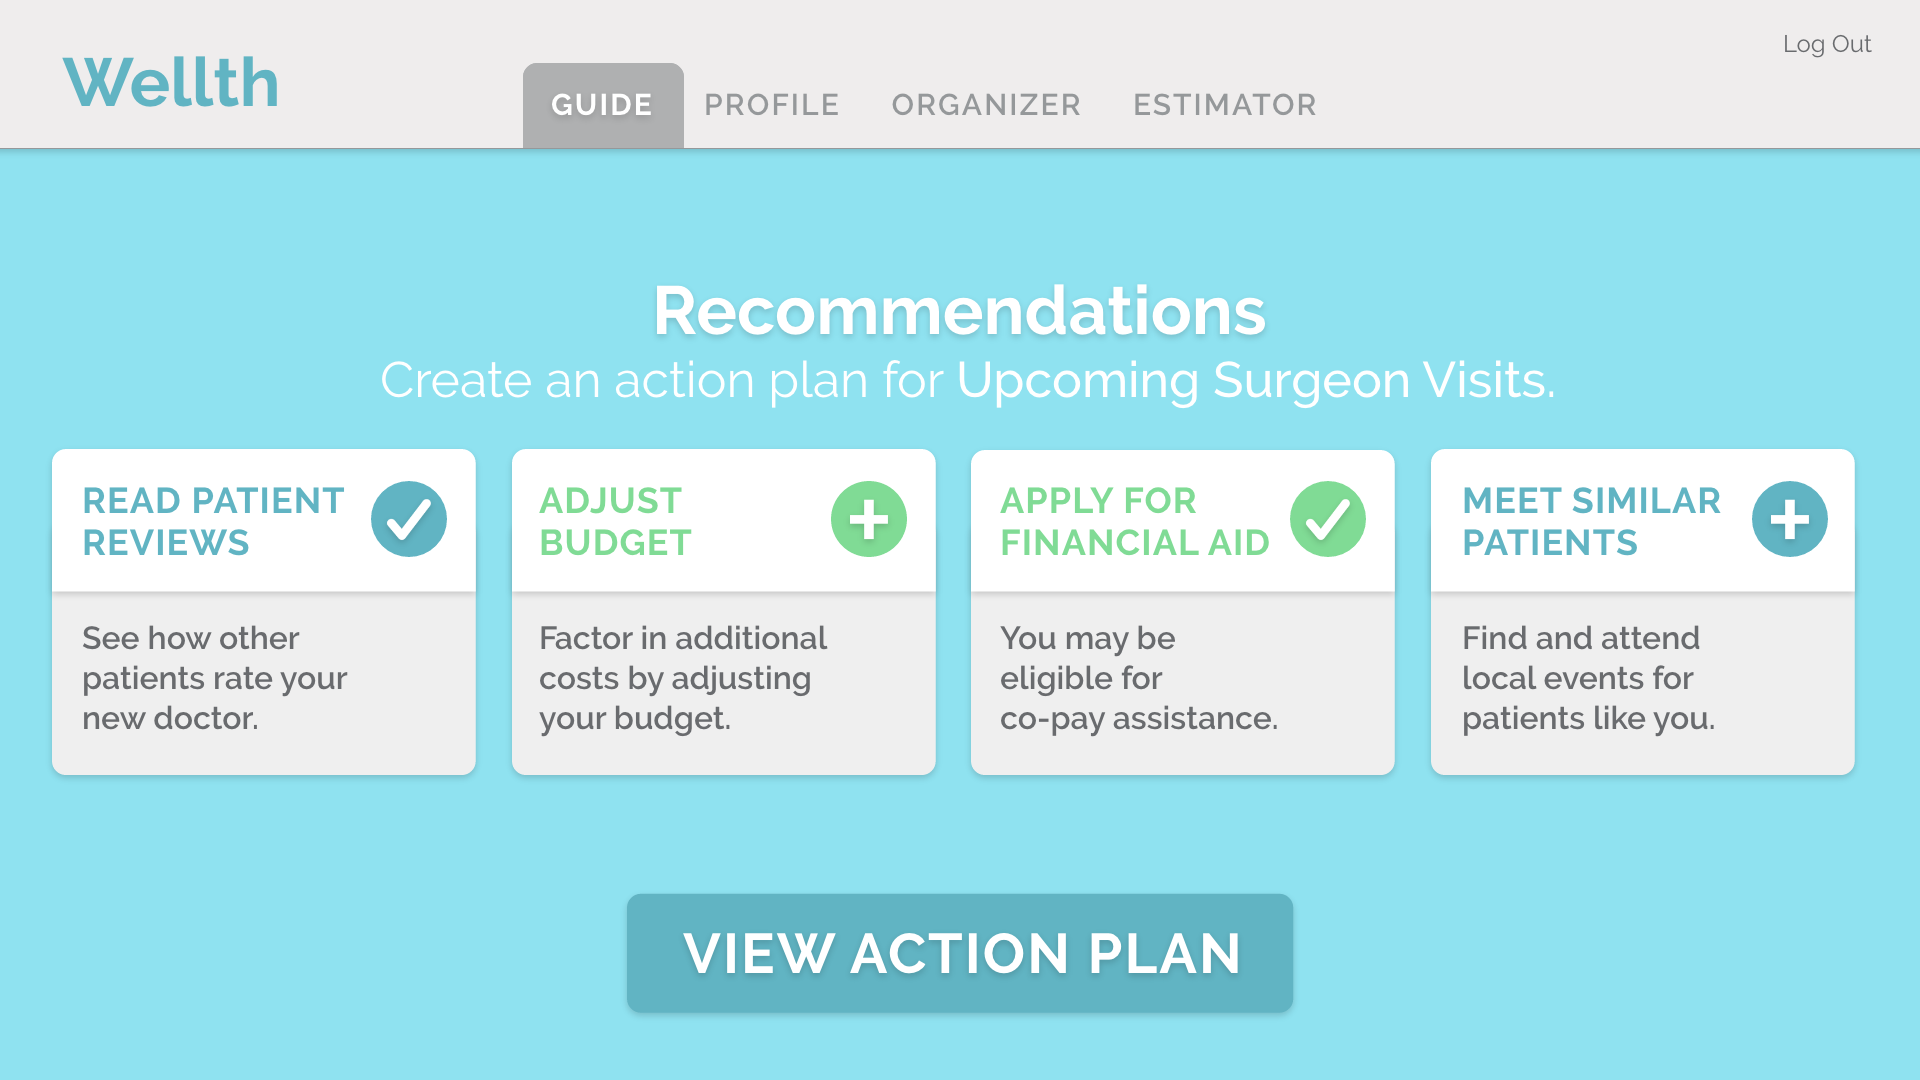 Guide-5-Recommendations-ViewActionPlan.png